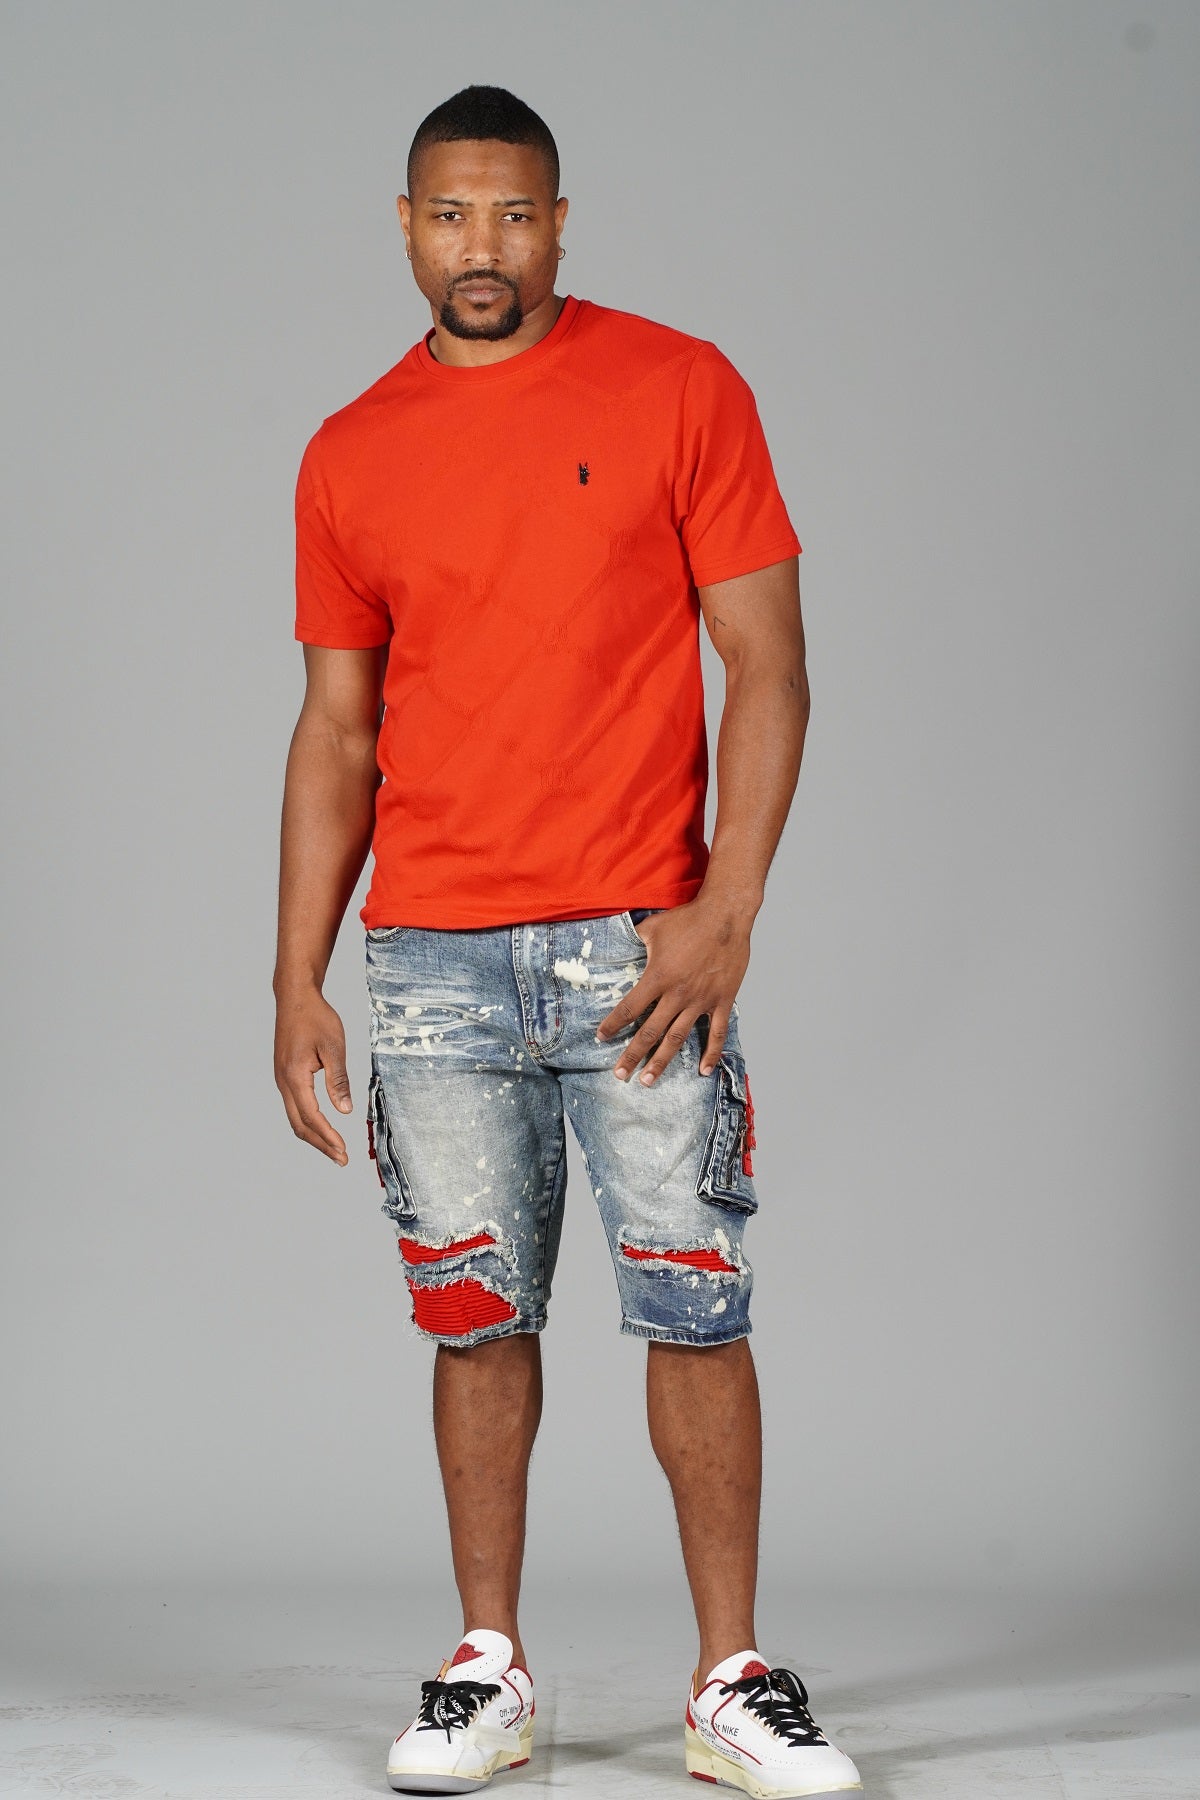 M298 Embossed Knit Tee - Red